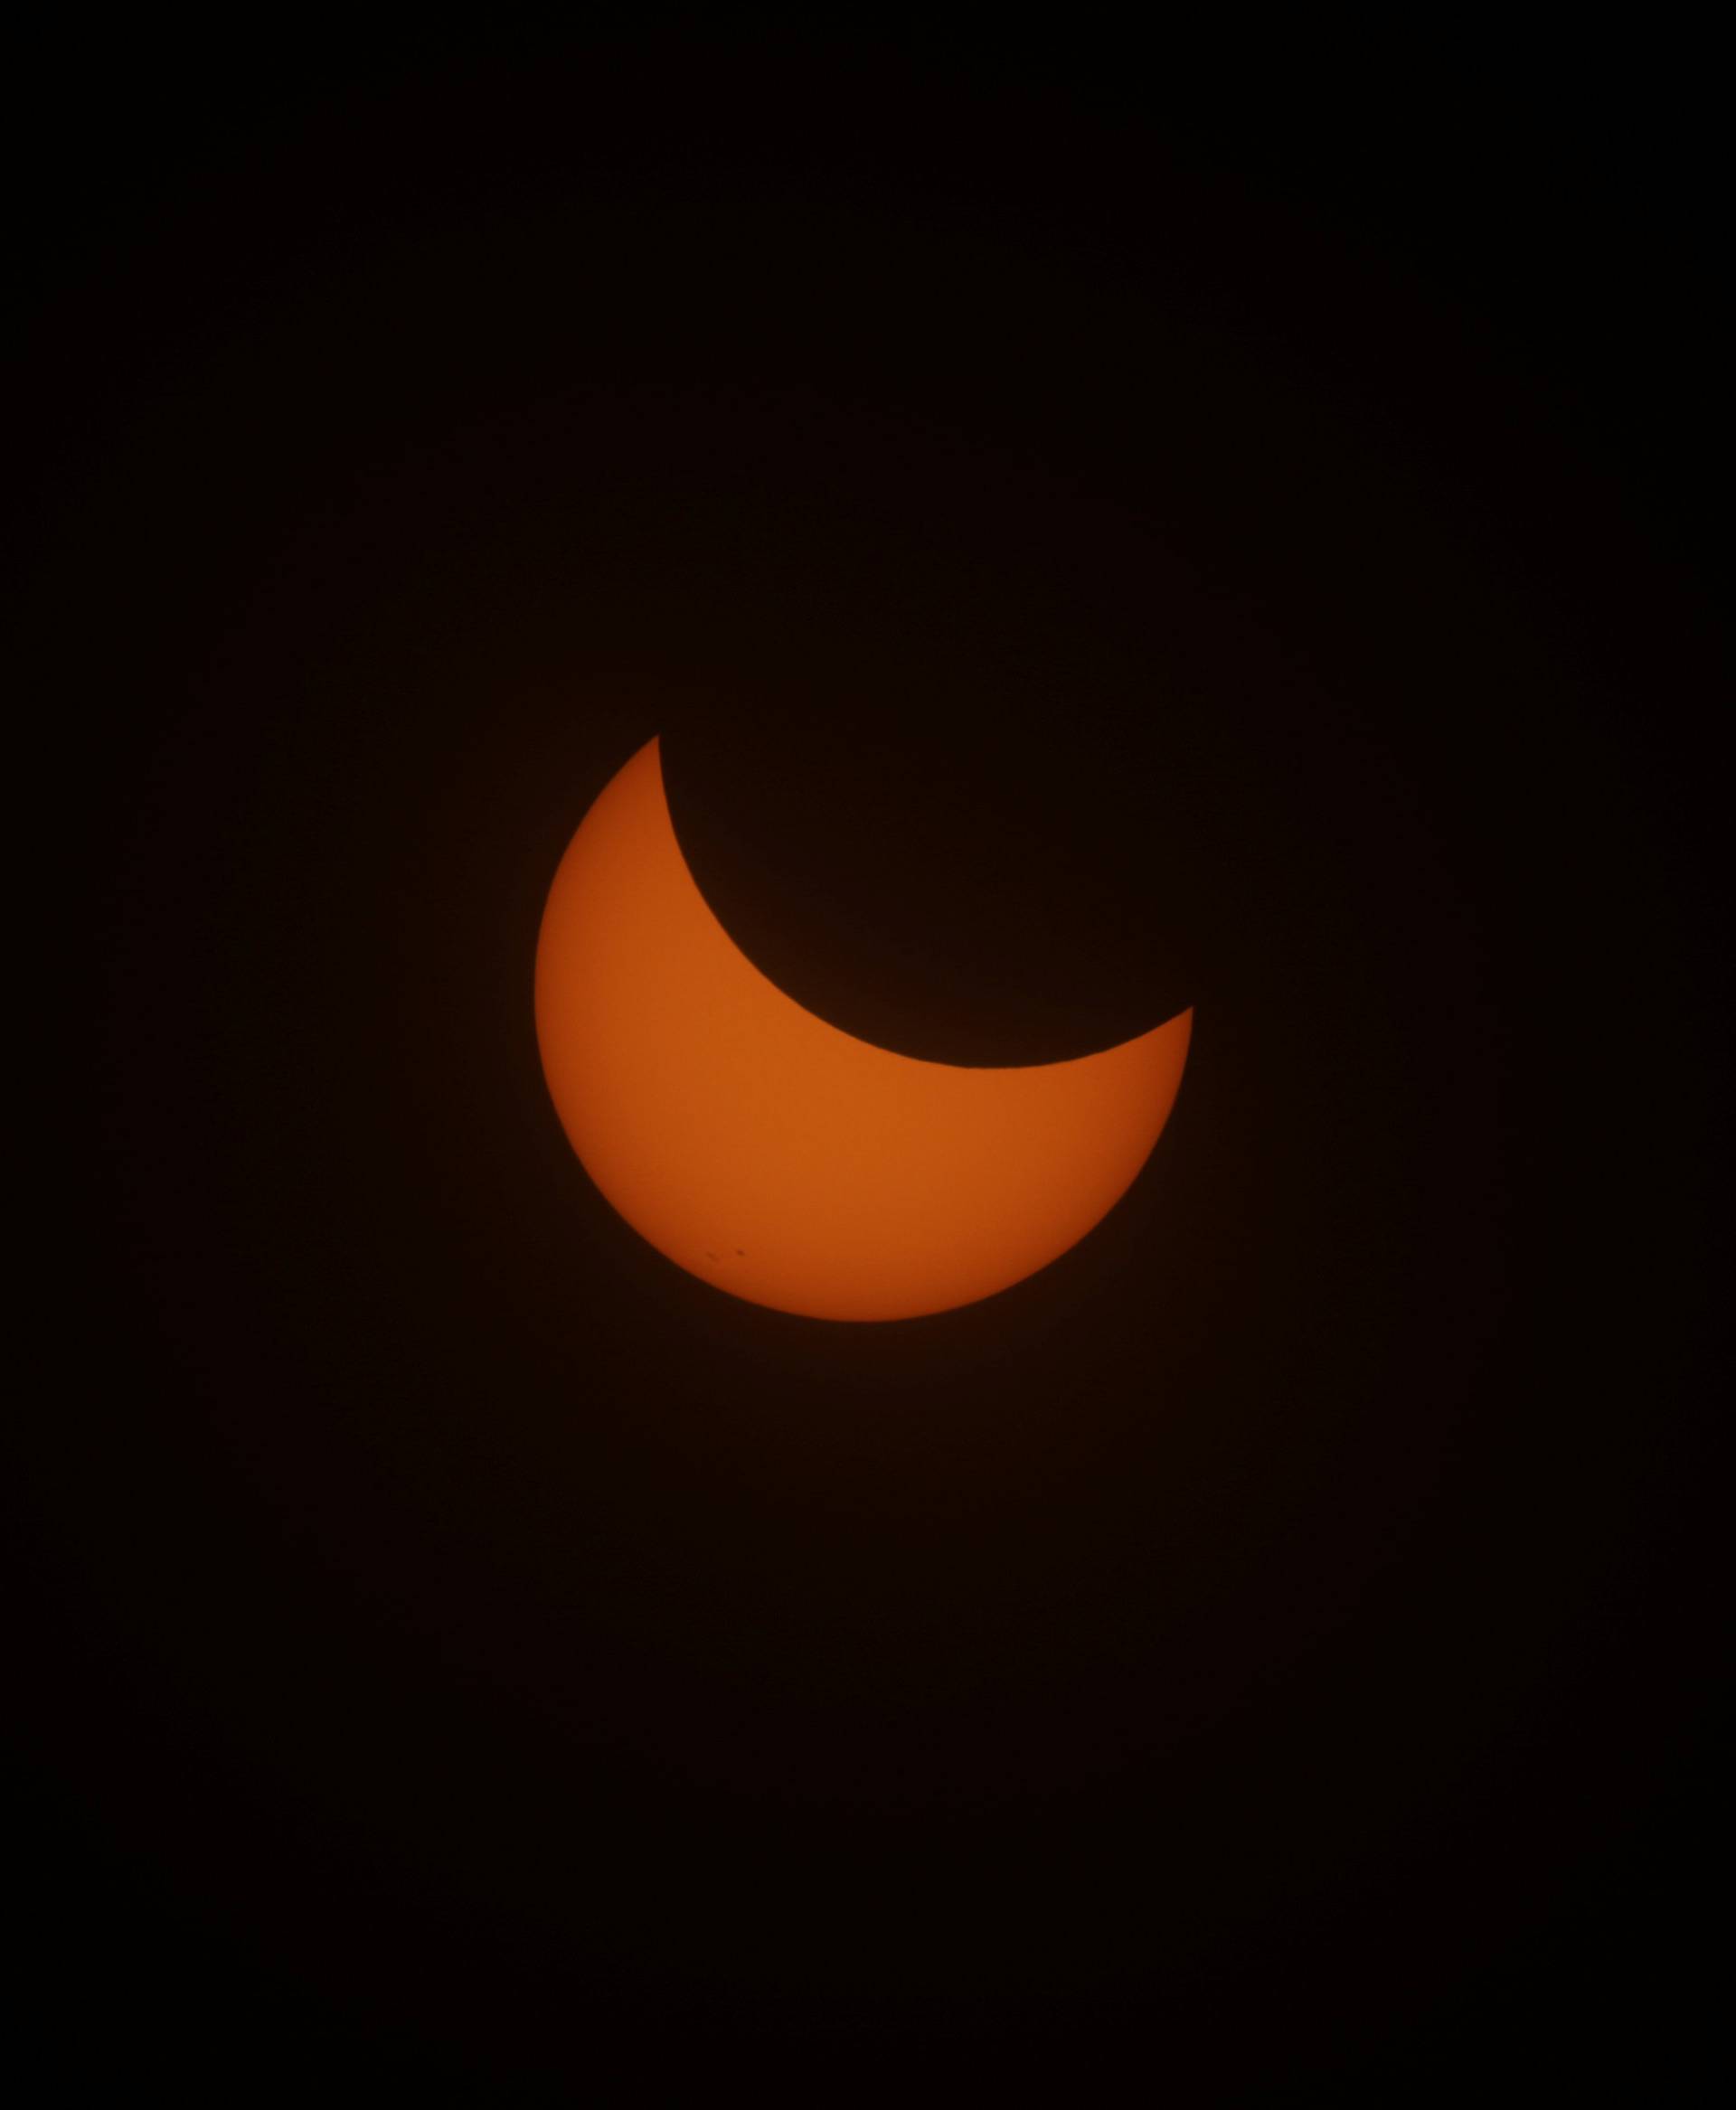 The sun is obscured during the solar eclipse in Depoe Bay